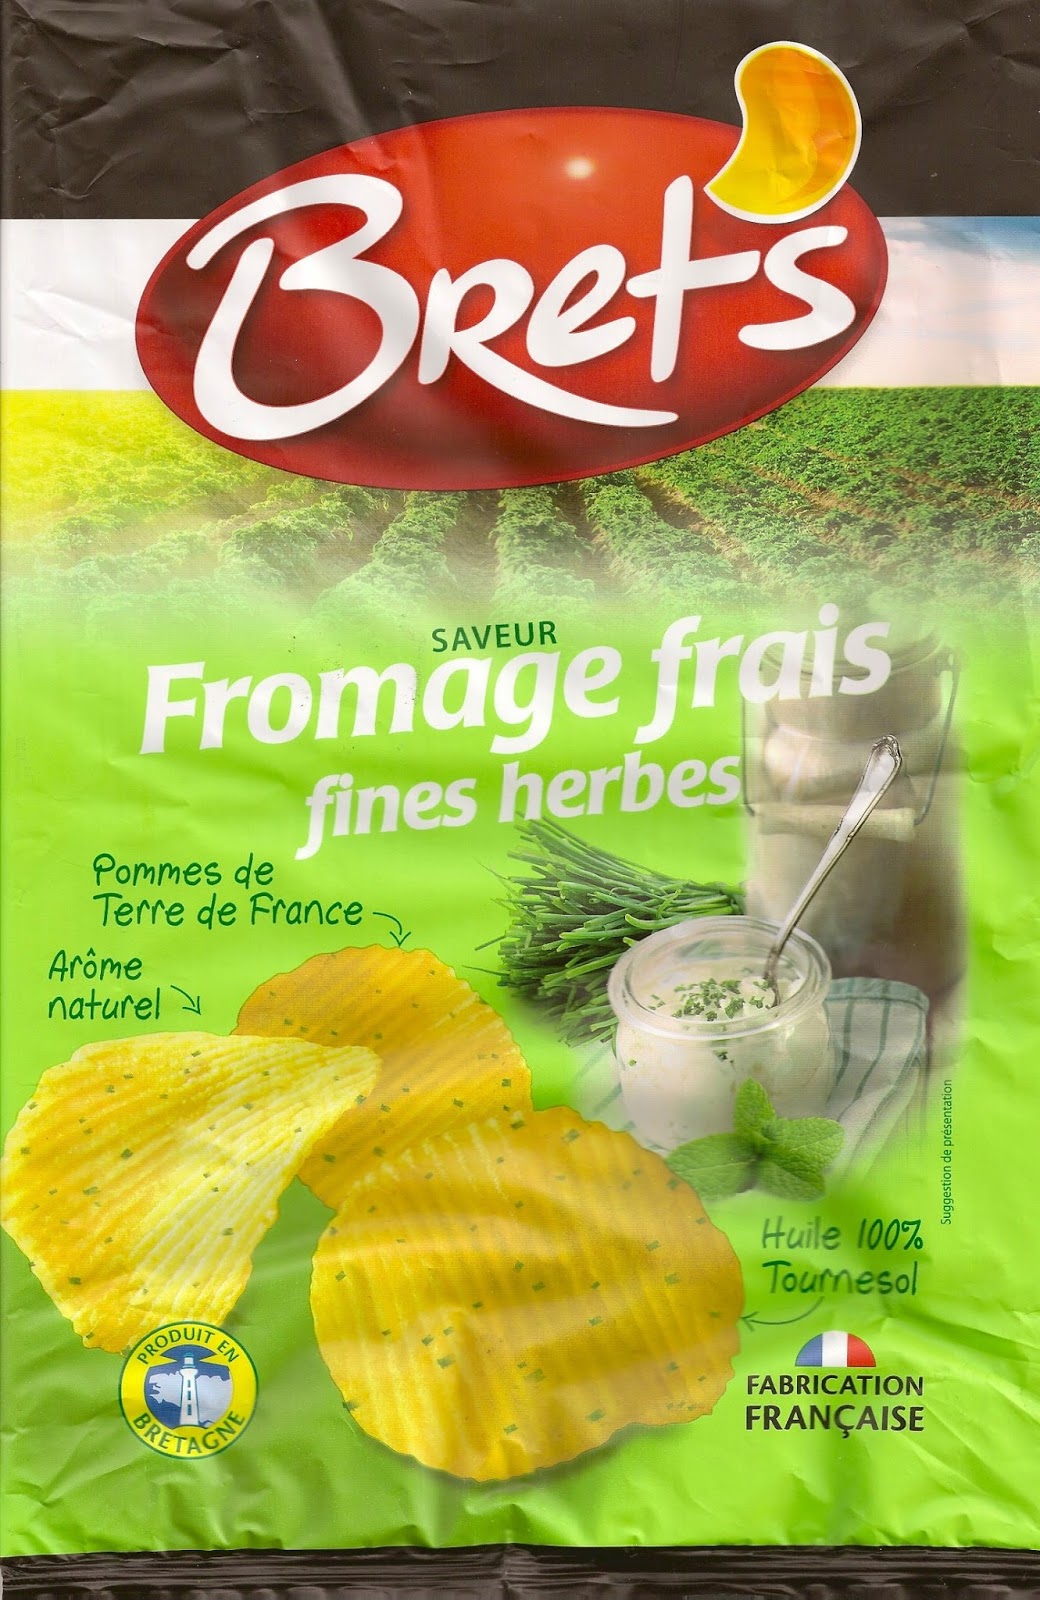 Brets Crisps Fromage Frais and Herbs - The Goods Shed